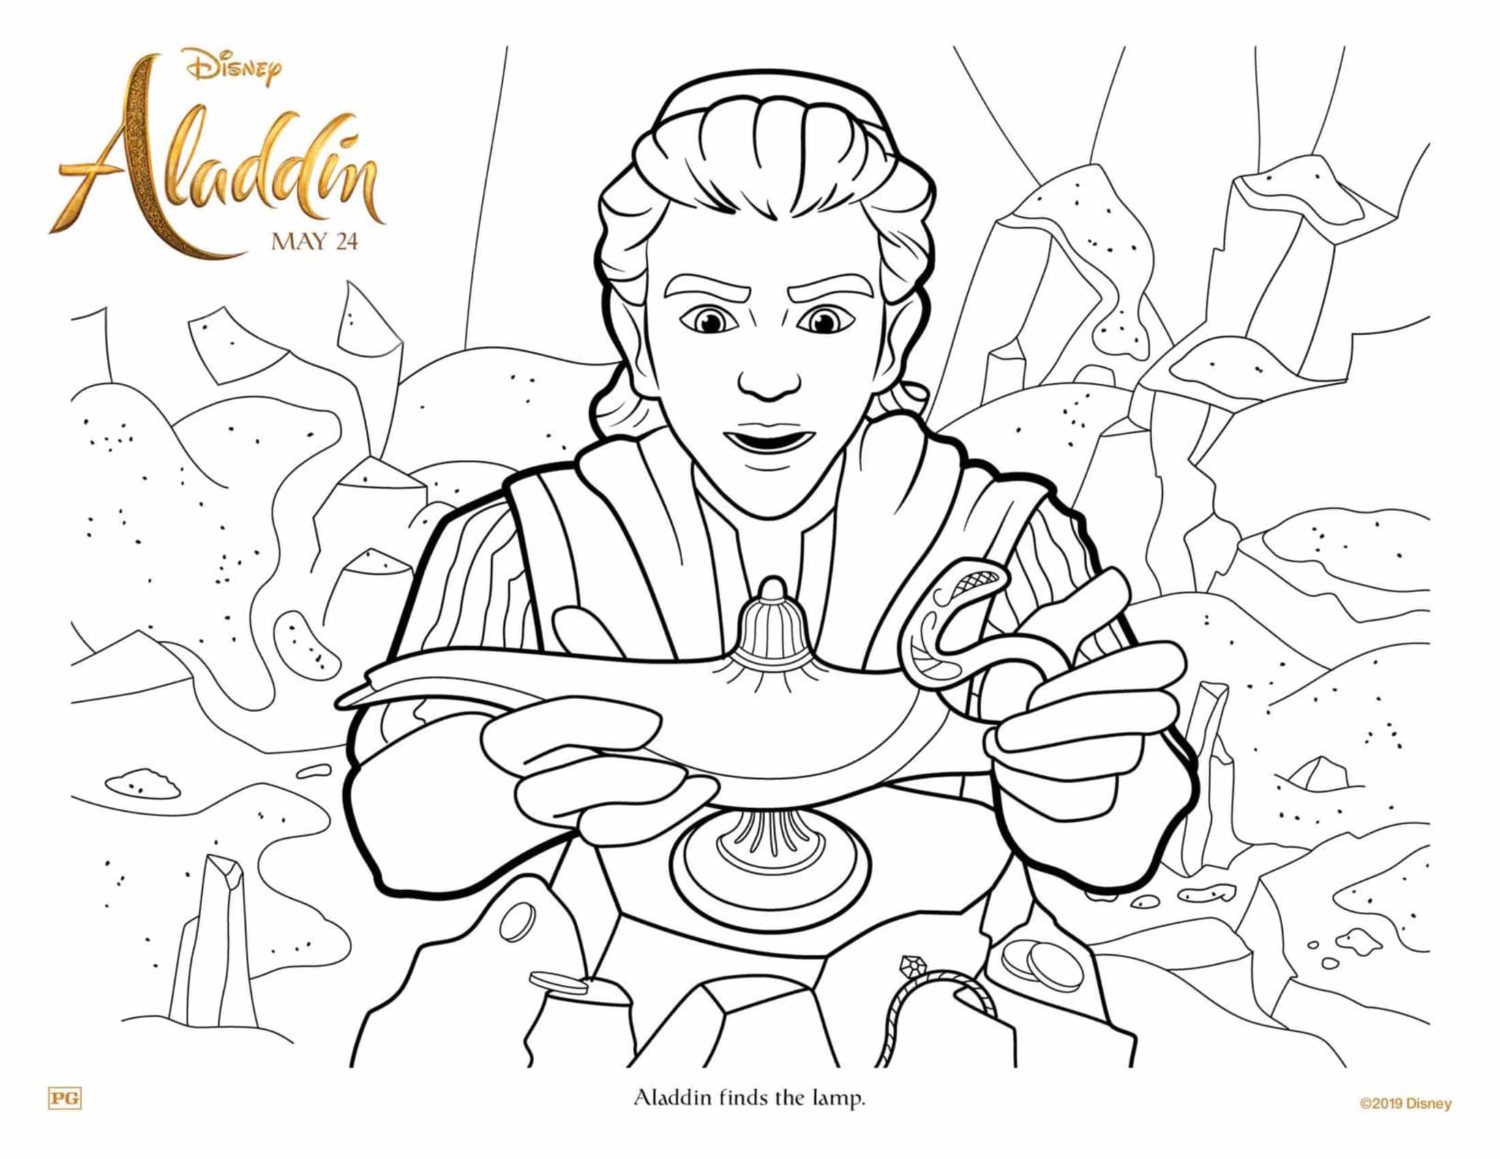 Aladdin Finds the Lamp Coloring Page and Activity Sheet